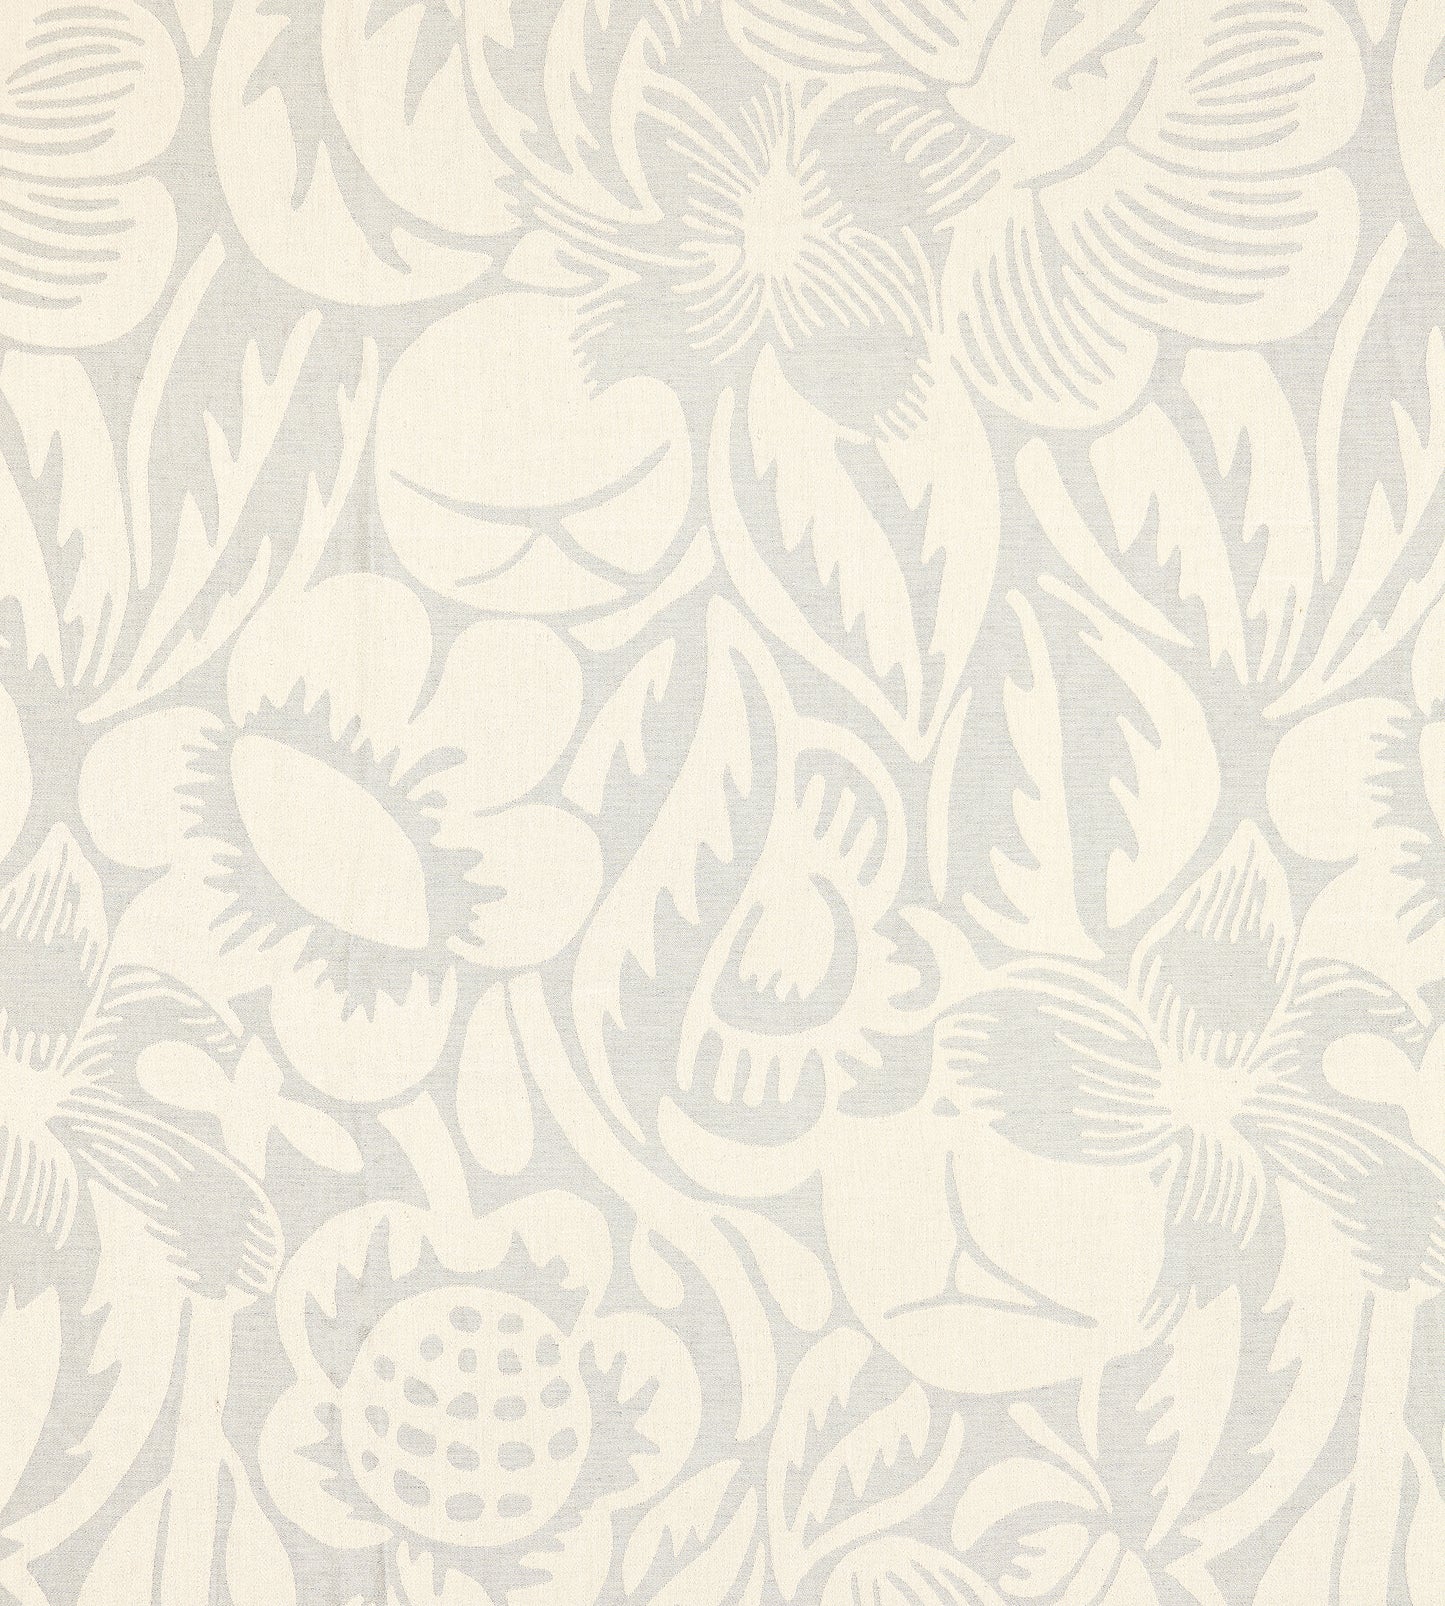 Purchase Scalamandre Fabric Product# SC 000327131, Deco Flower Mineral 1